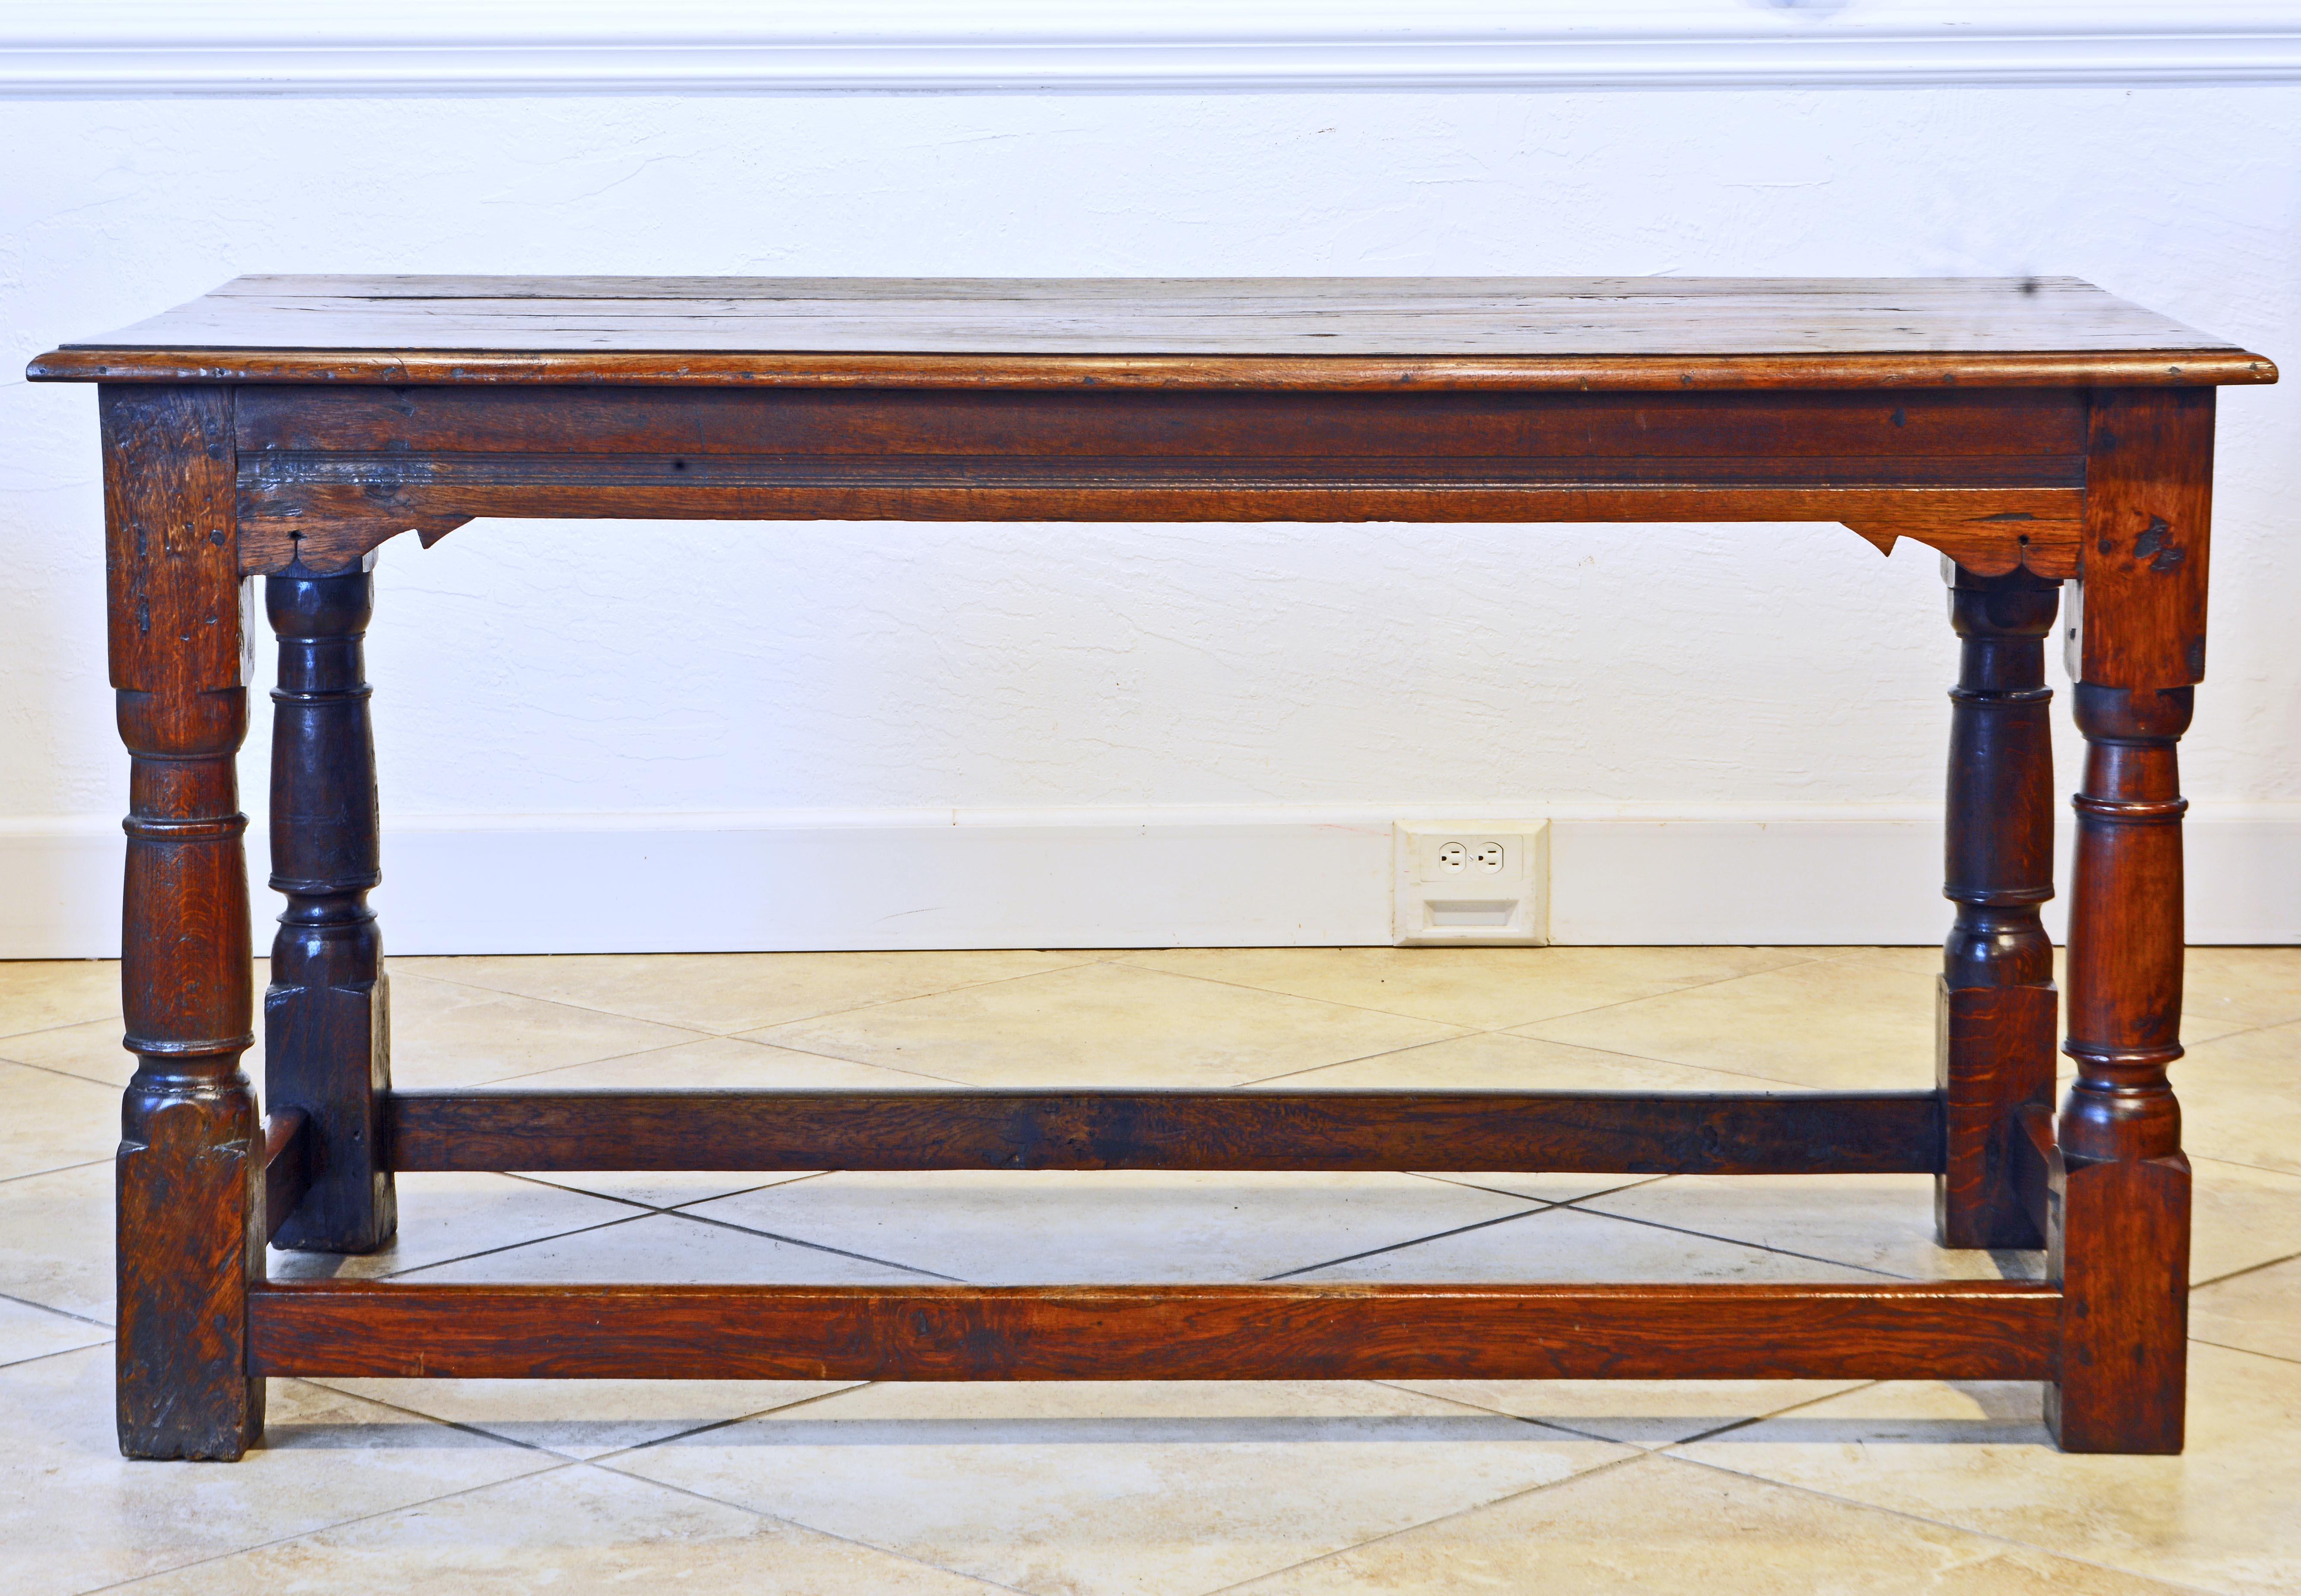 An exquisite 18th century English oak refectory table featuring a well patinated four plank top above a beautifully carved frieze with inlay of molded channel resting on four baluster carved legs joined by the stretcher base. With its beautiful warm